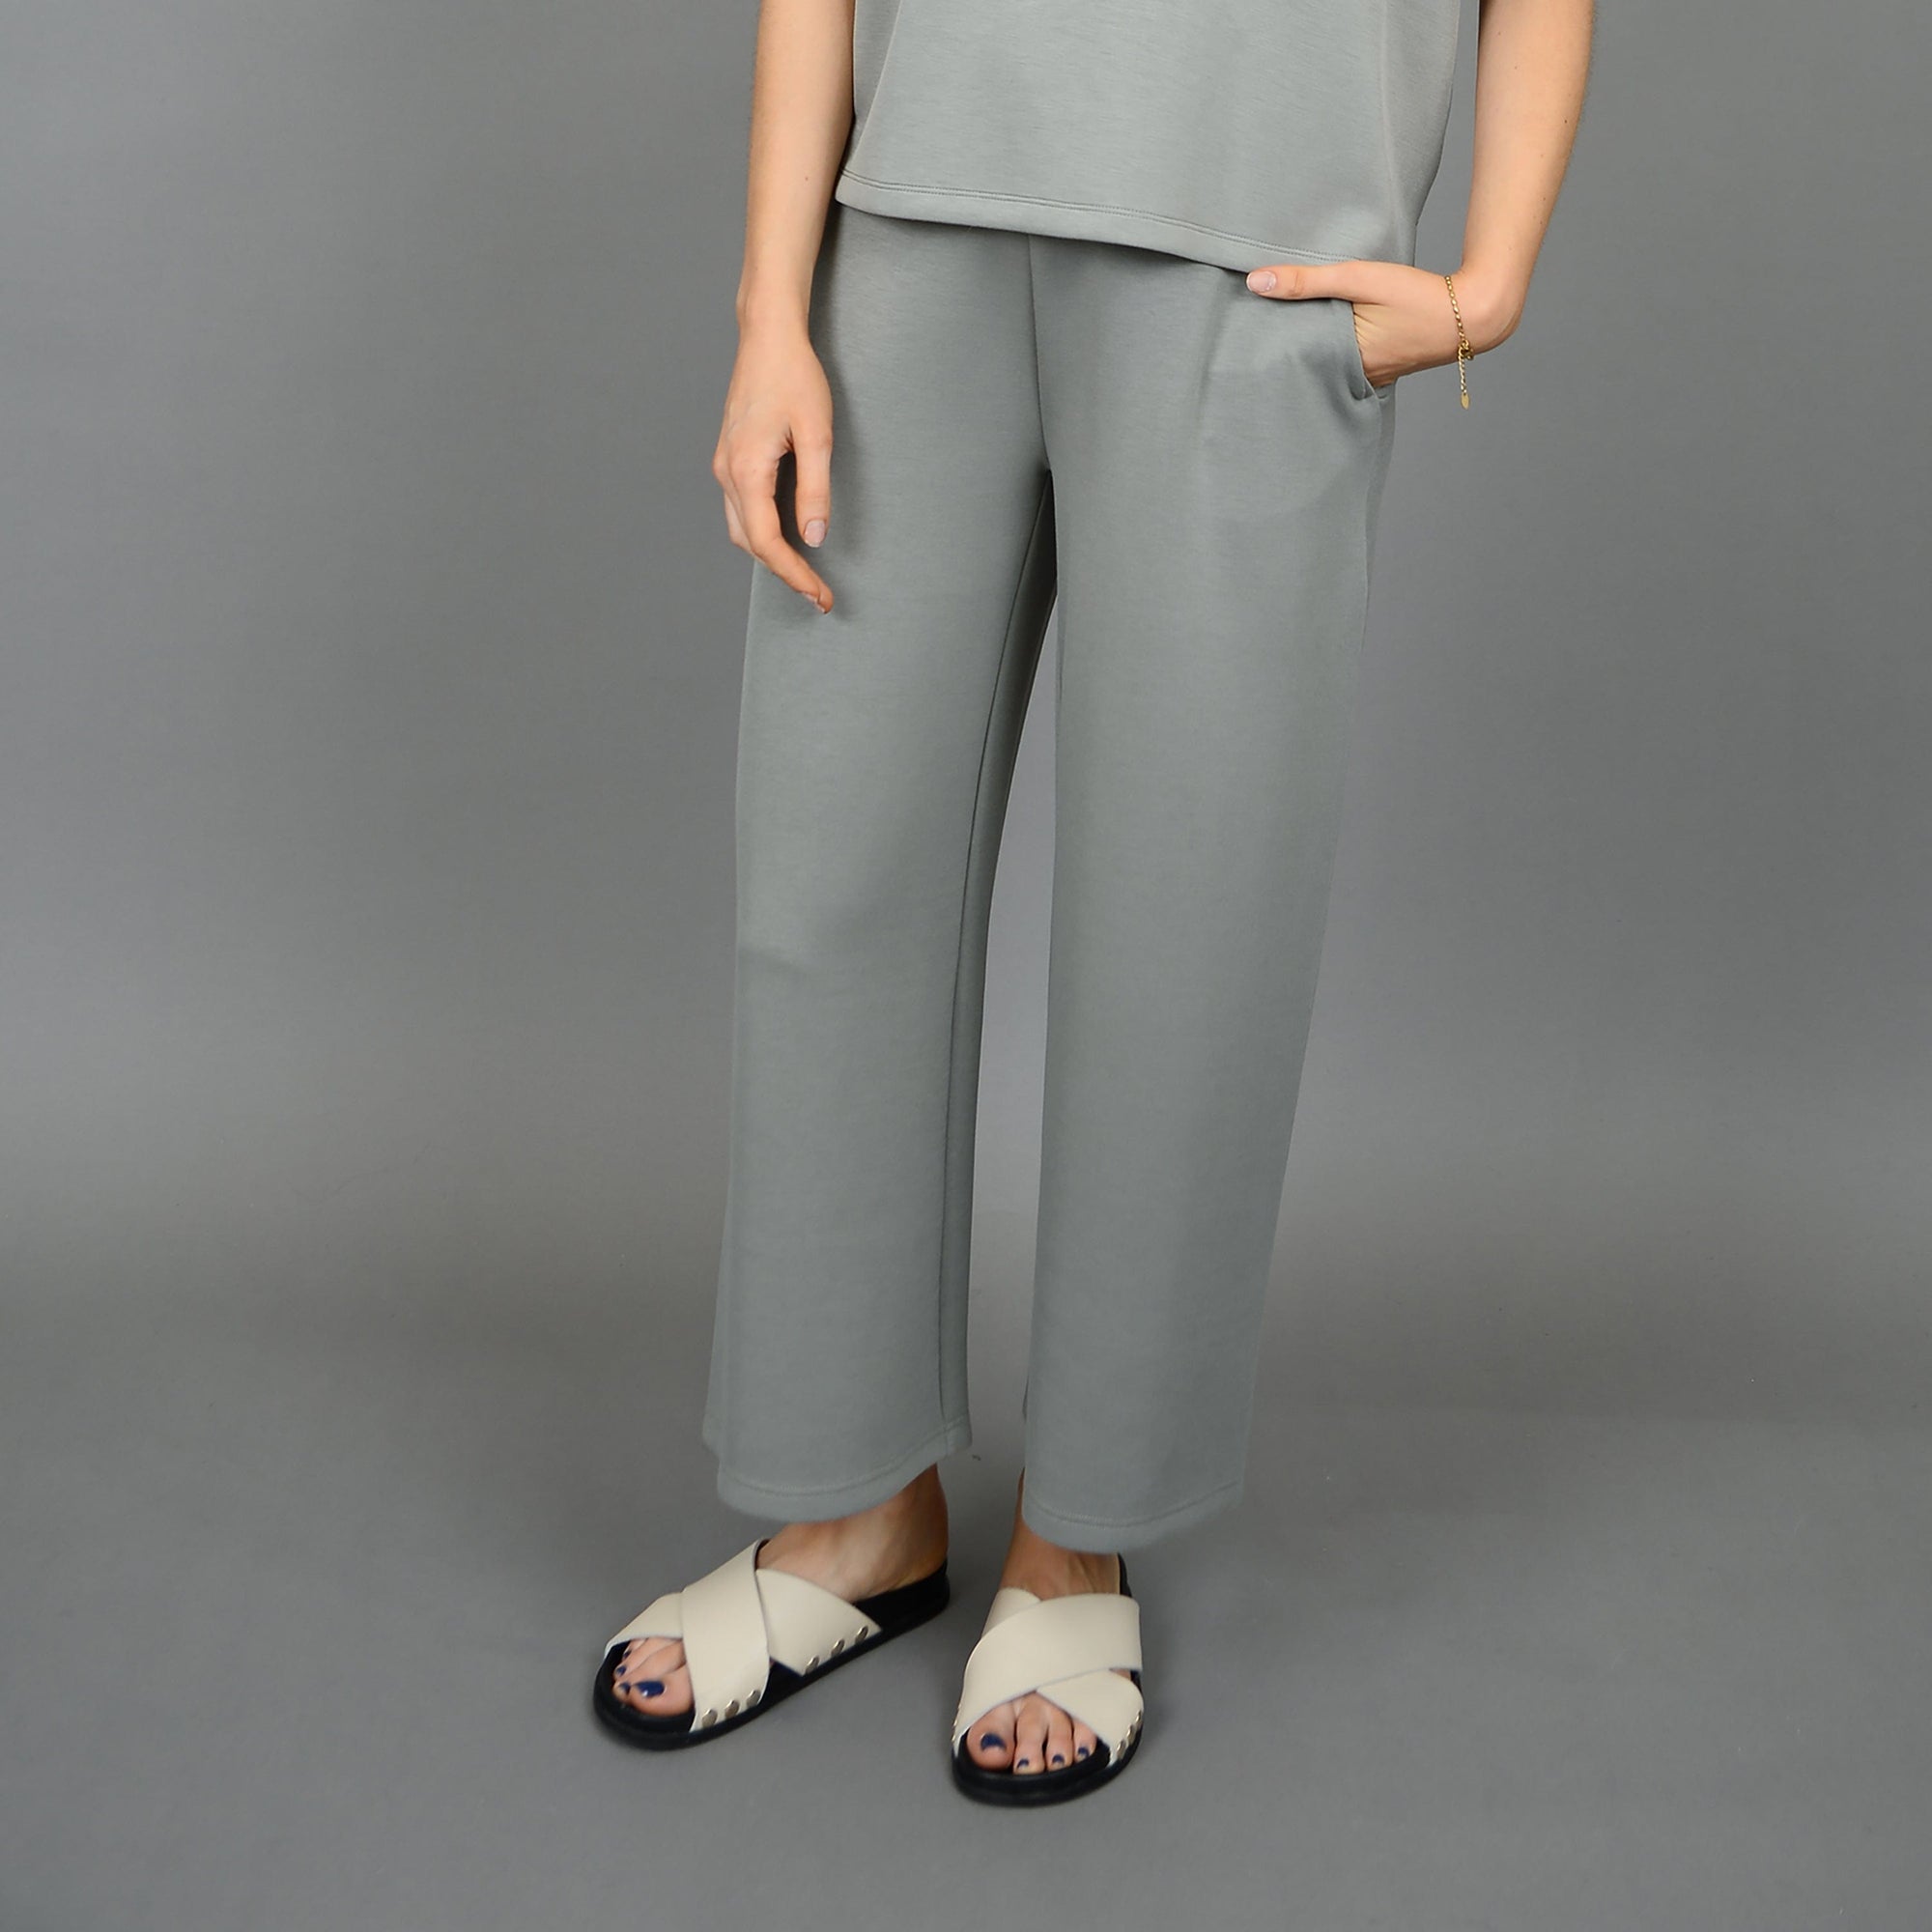 RD Sage / XS Second Skin Victoria Soft Knit Cropped Pants